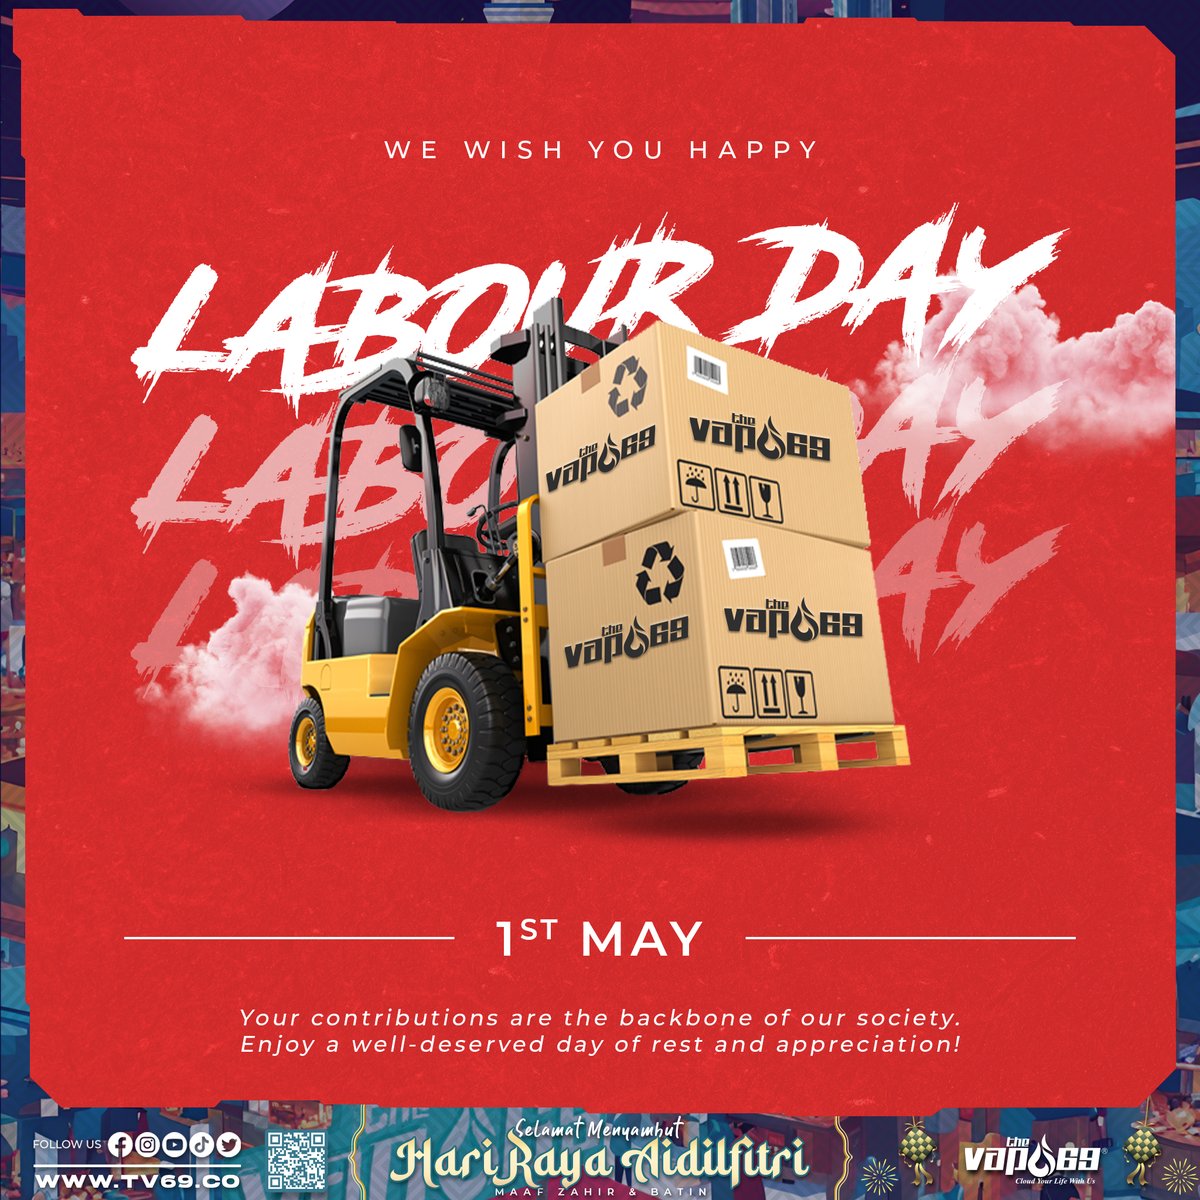 Happy Labour Day! 
Here's to celebrating the hard work, dedication, and achievements of workers everywhere. Your contributions are the backbone of our society. Enjoy a well-deserved day of rest and appreciation!